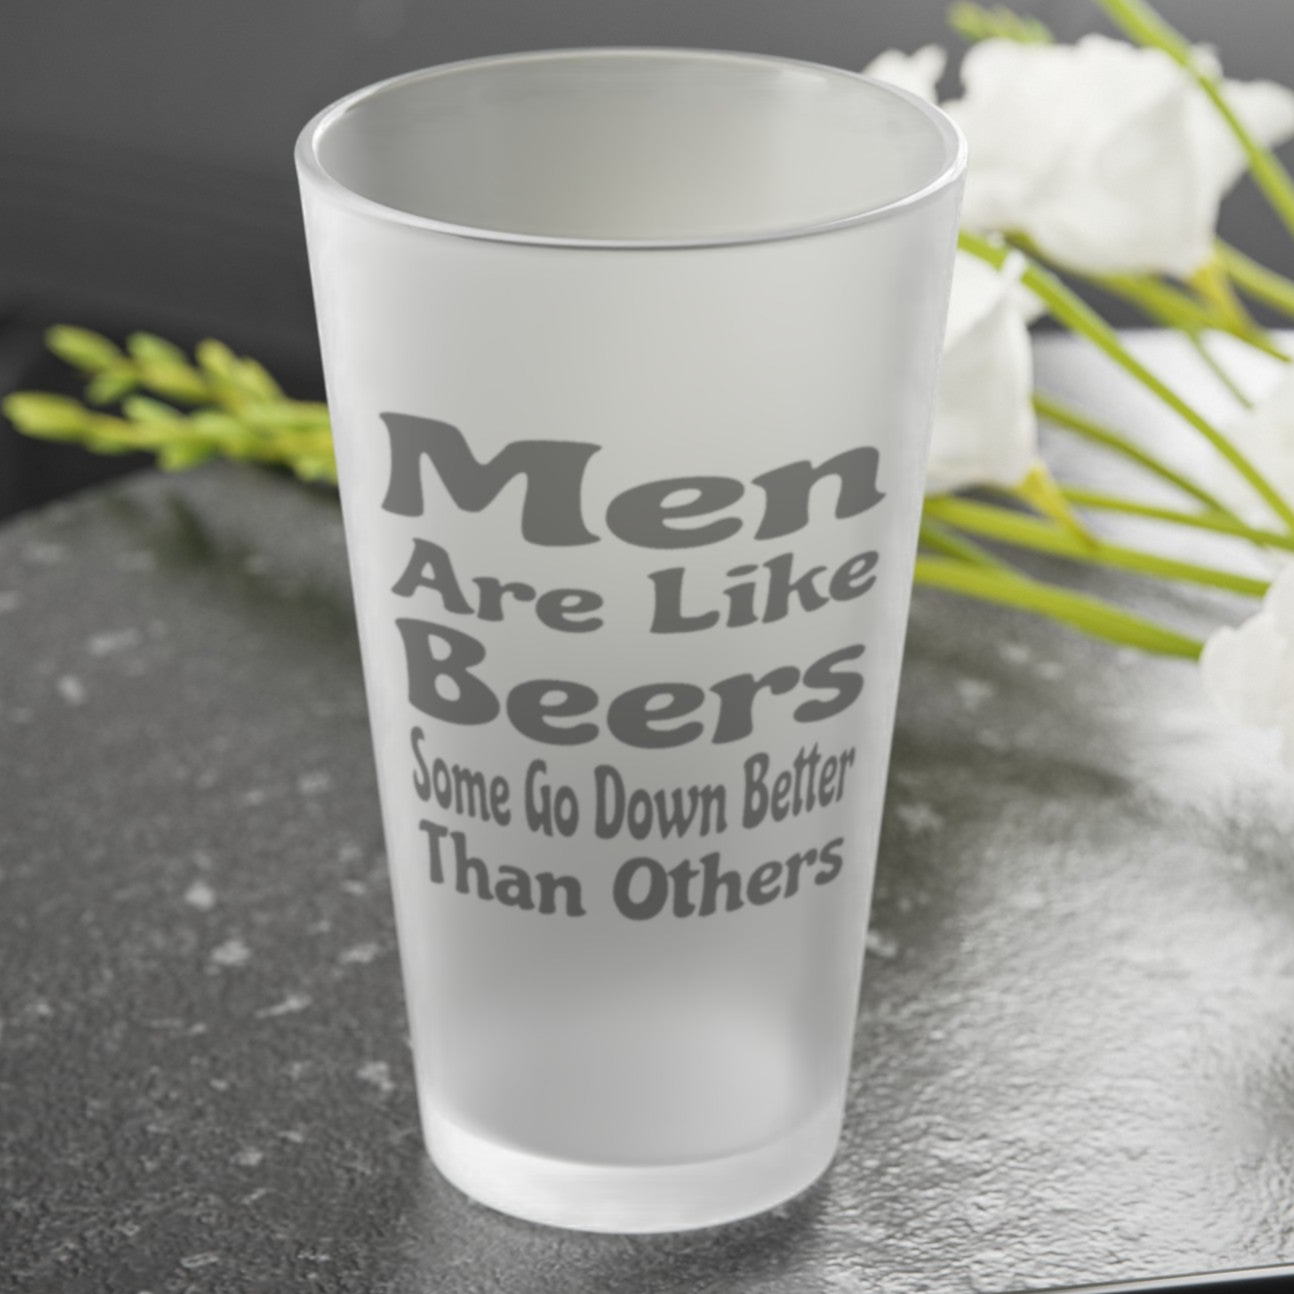 Men Are Like Beers, Some Go Down Better Than Others - Frosted Pint Glass, 16oz